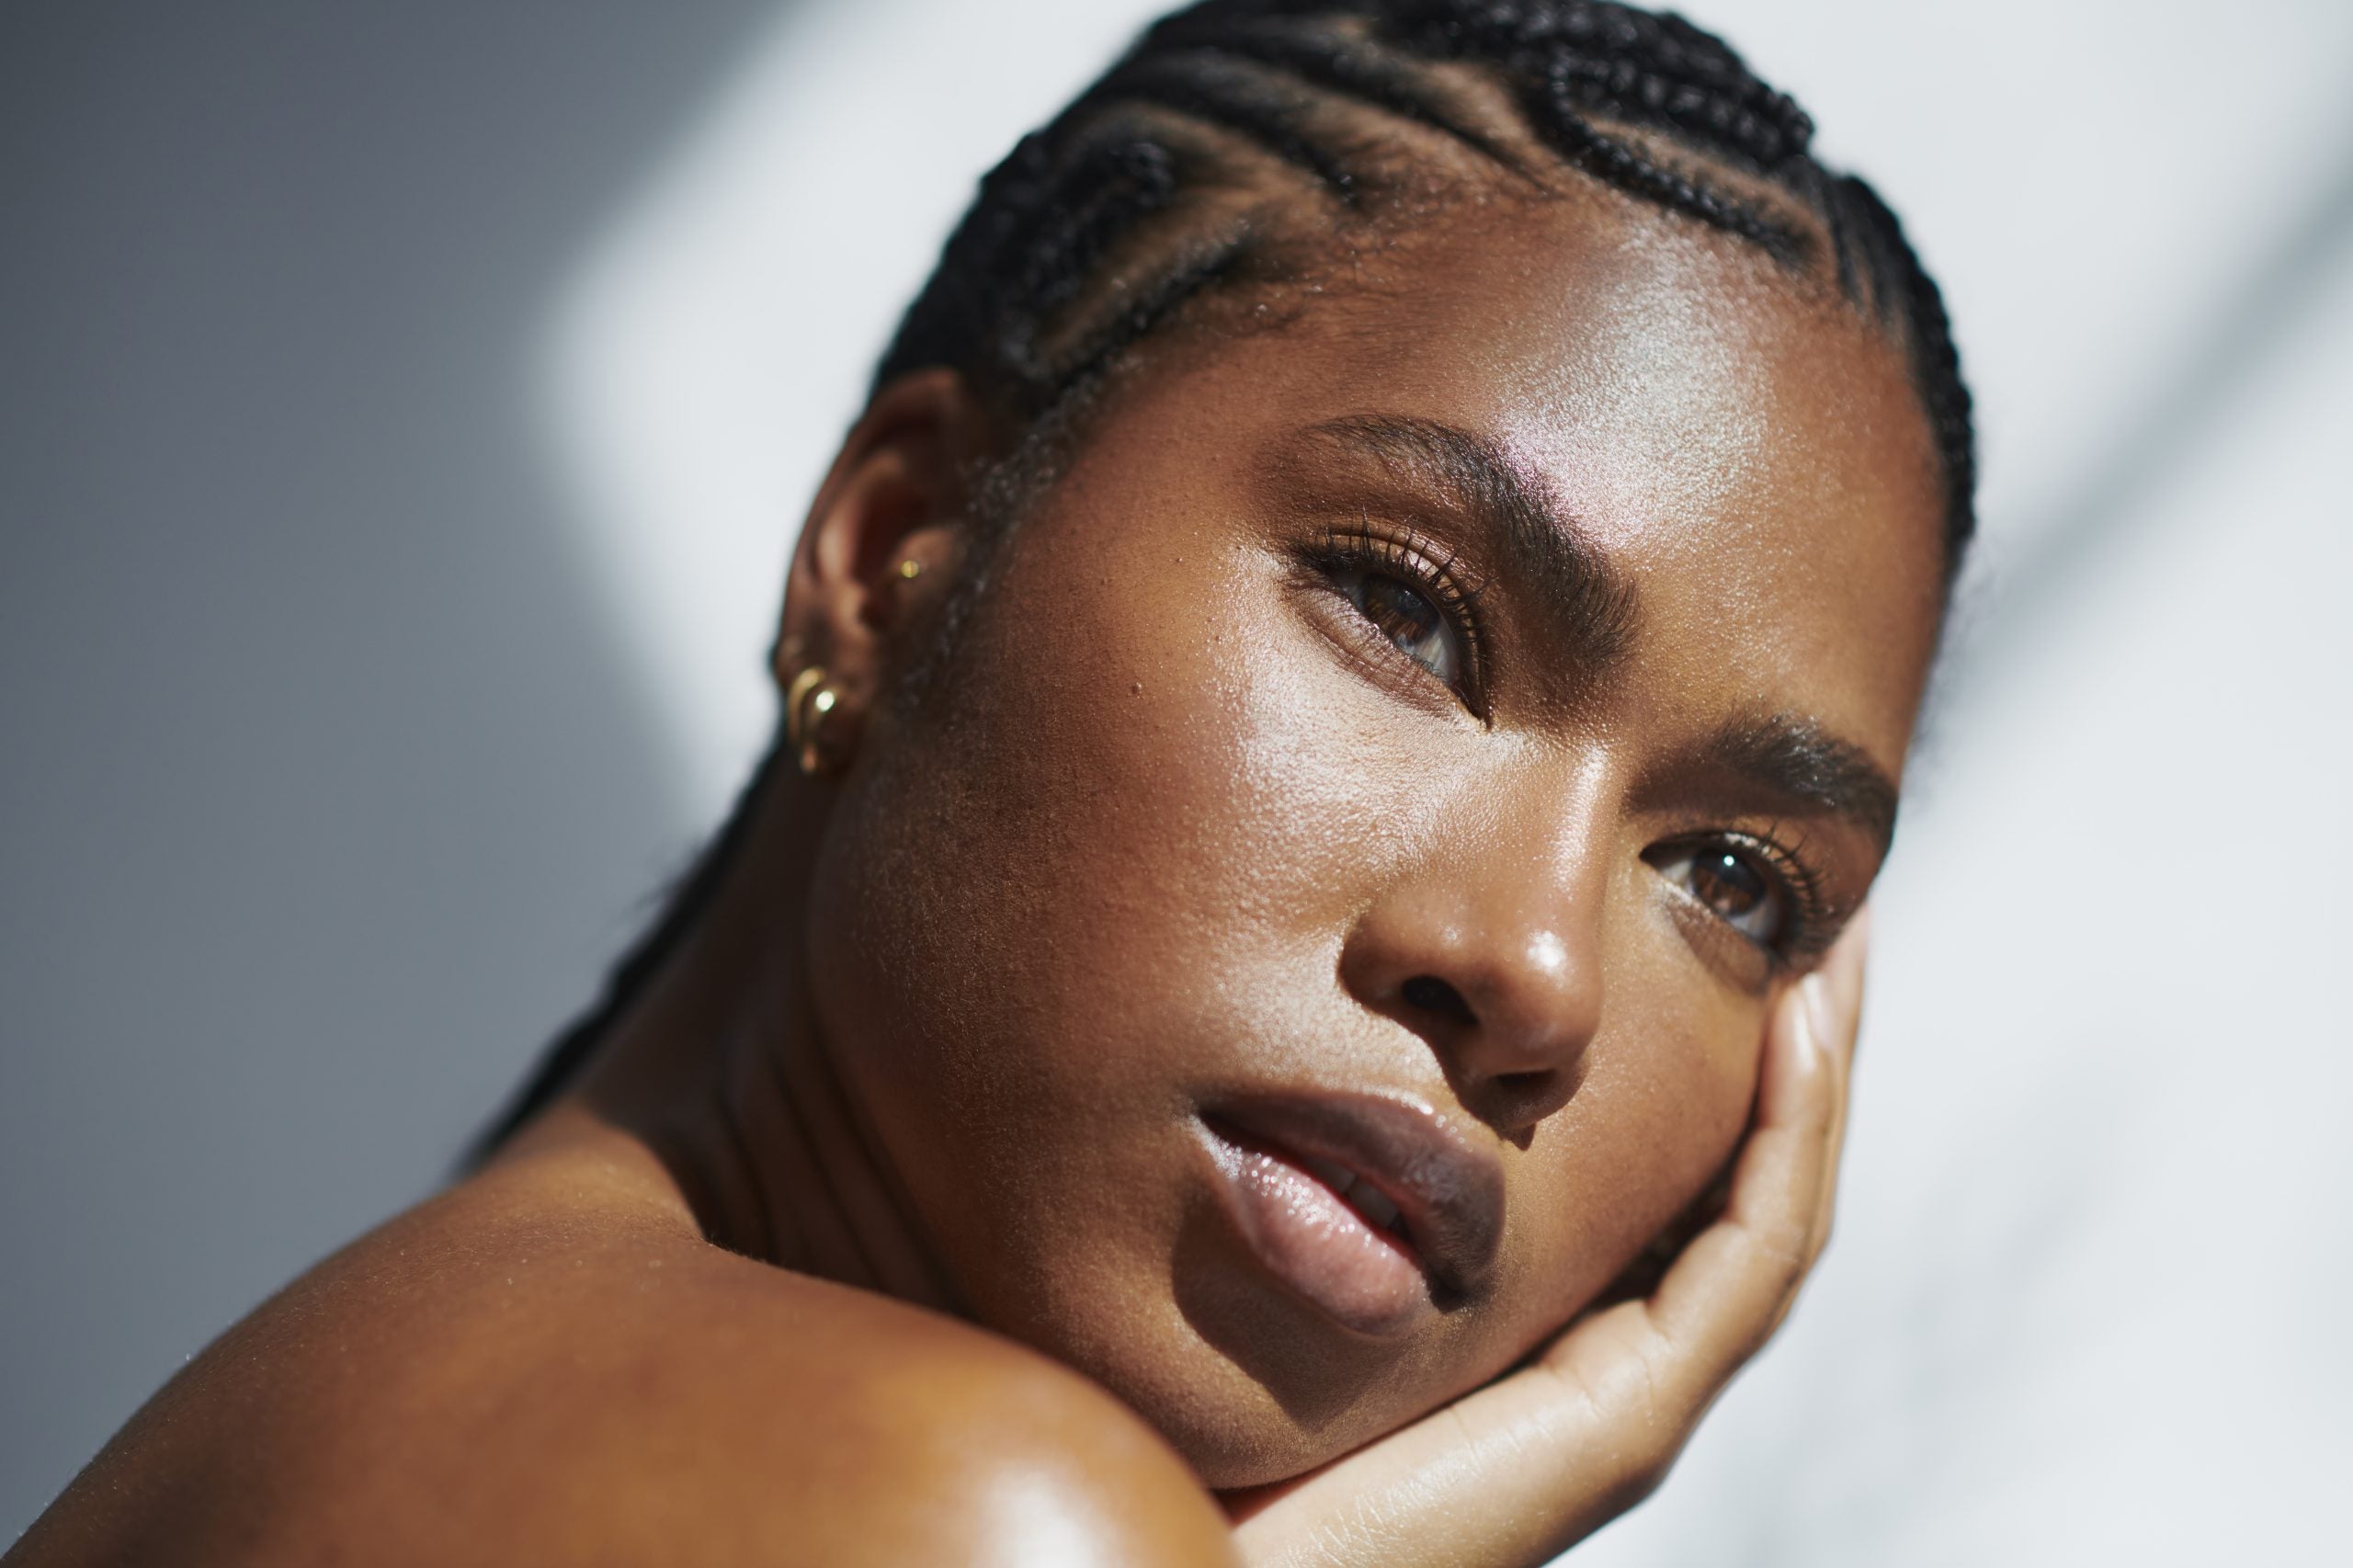 Black Can Crack: Here's How We Need To Care For Our Skin This Summer And Beyond